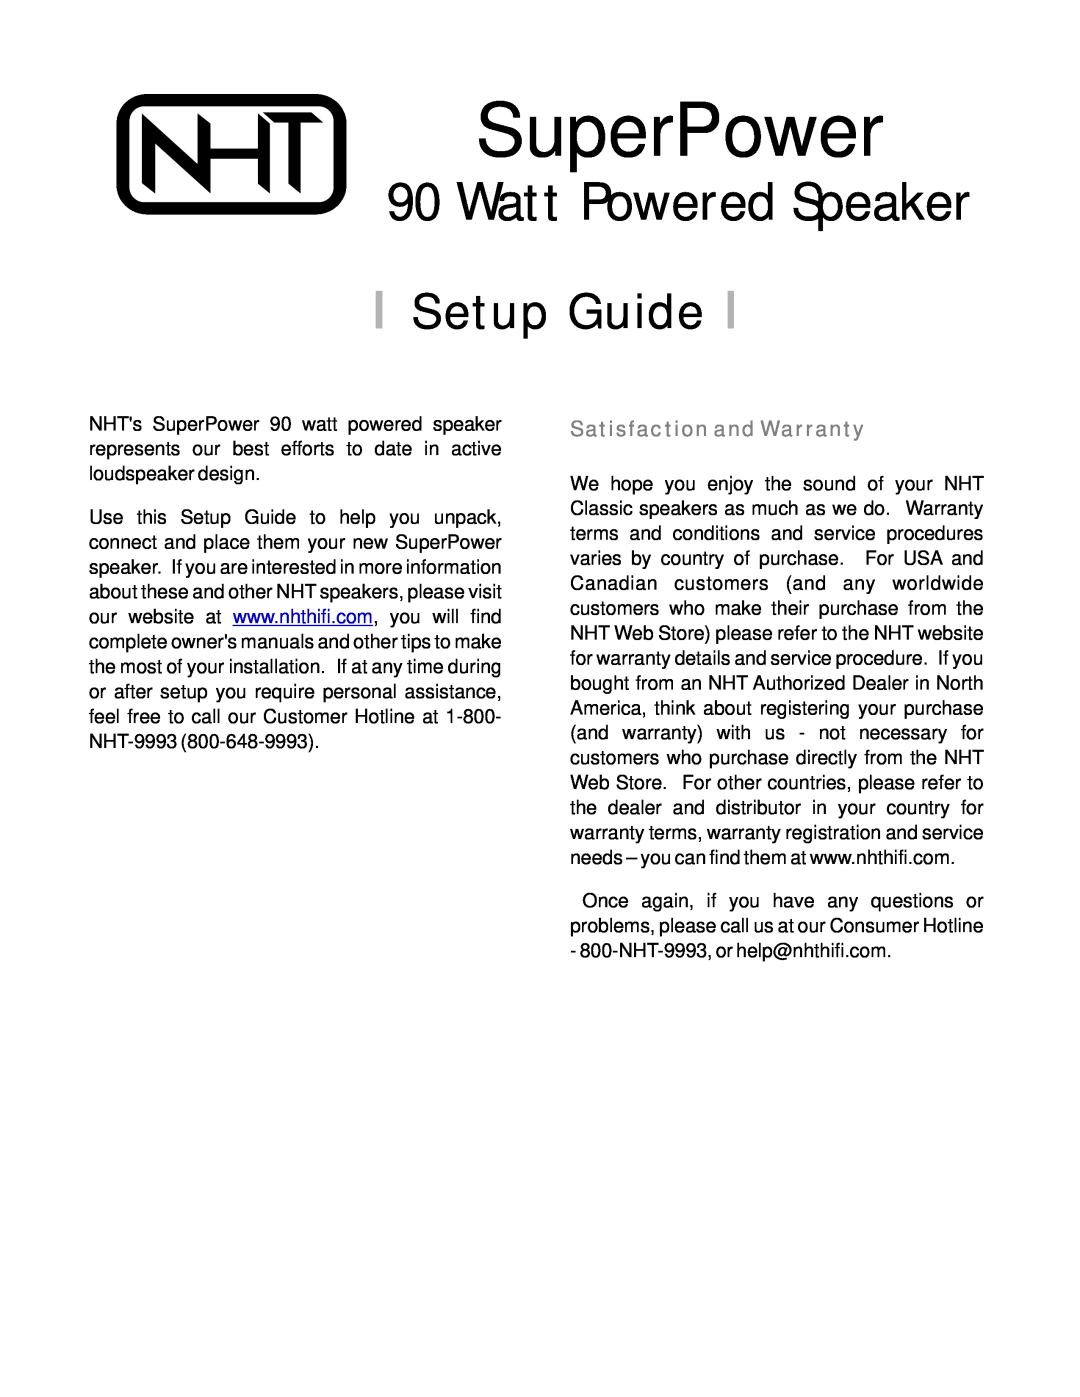 NHT 9993 setup guide Satisfaction and Warranty, SuperPower, Watt Powered Speaker, Setup Guide 